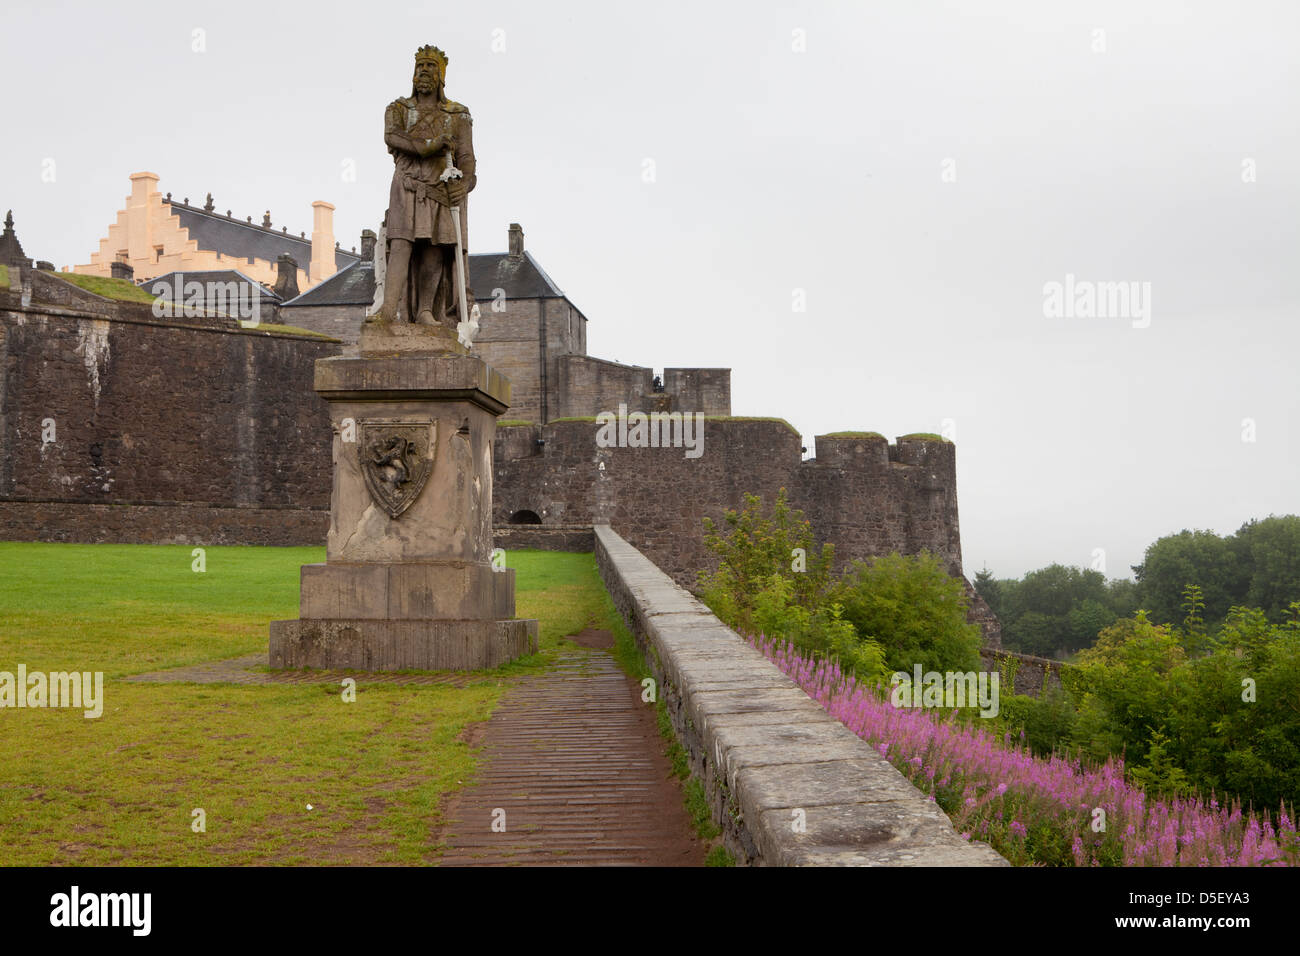 Statue of Robert the Bruce in Castle of Wyns, Stirling, Scotland Stock Photo